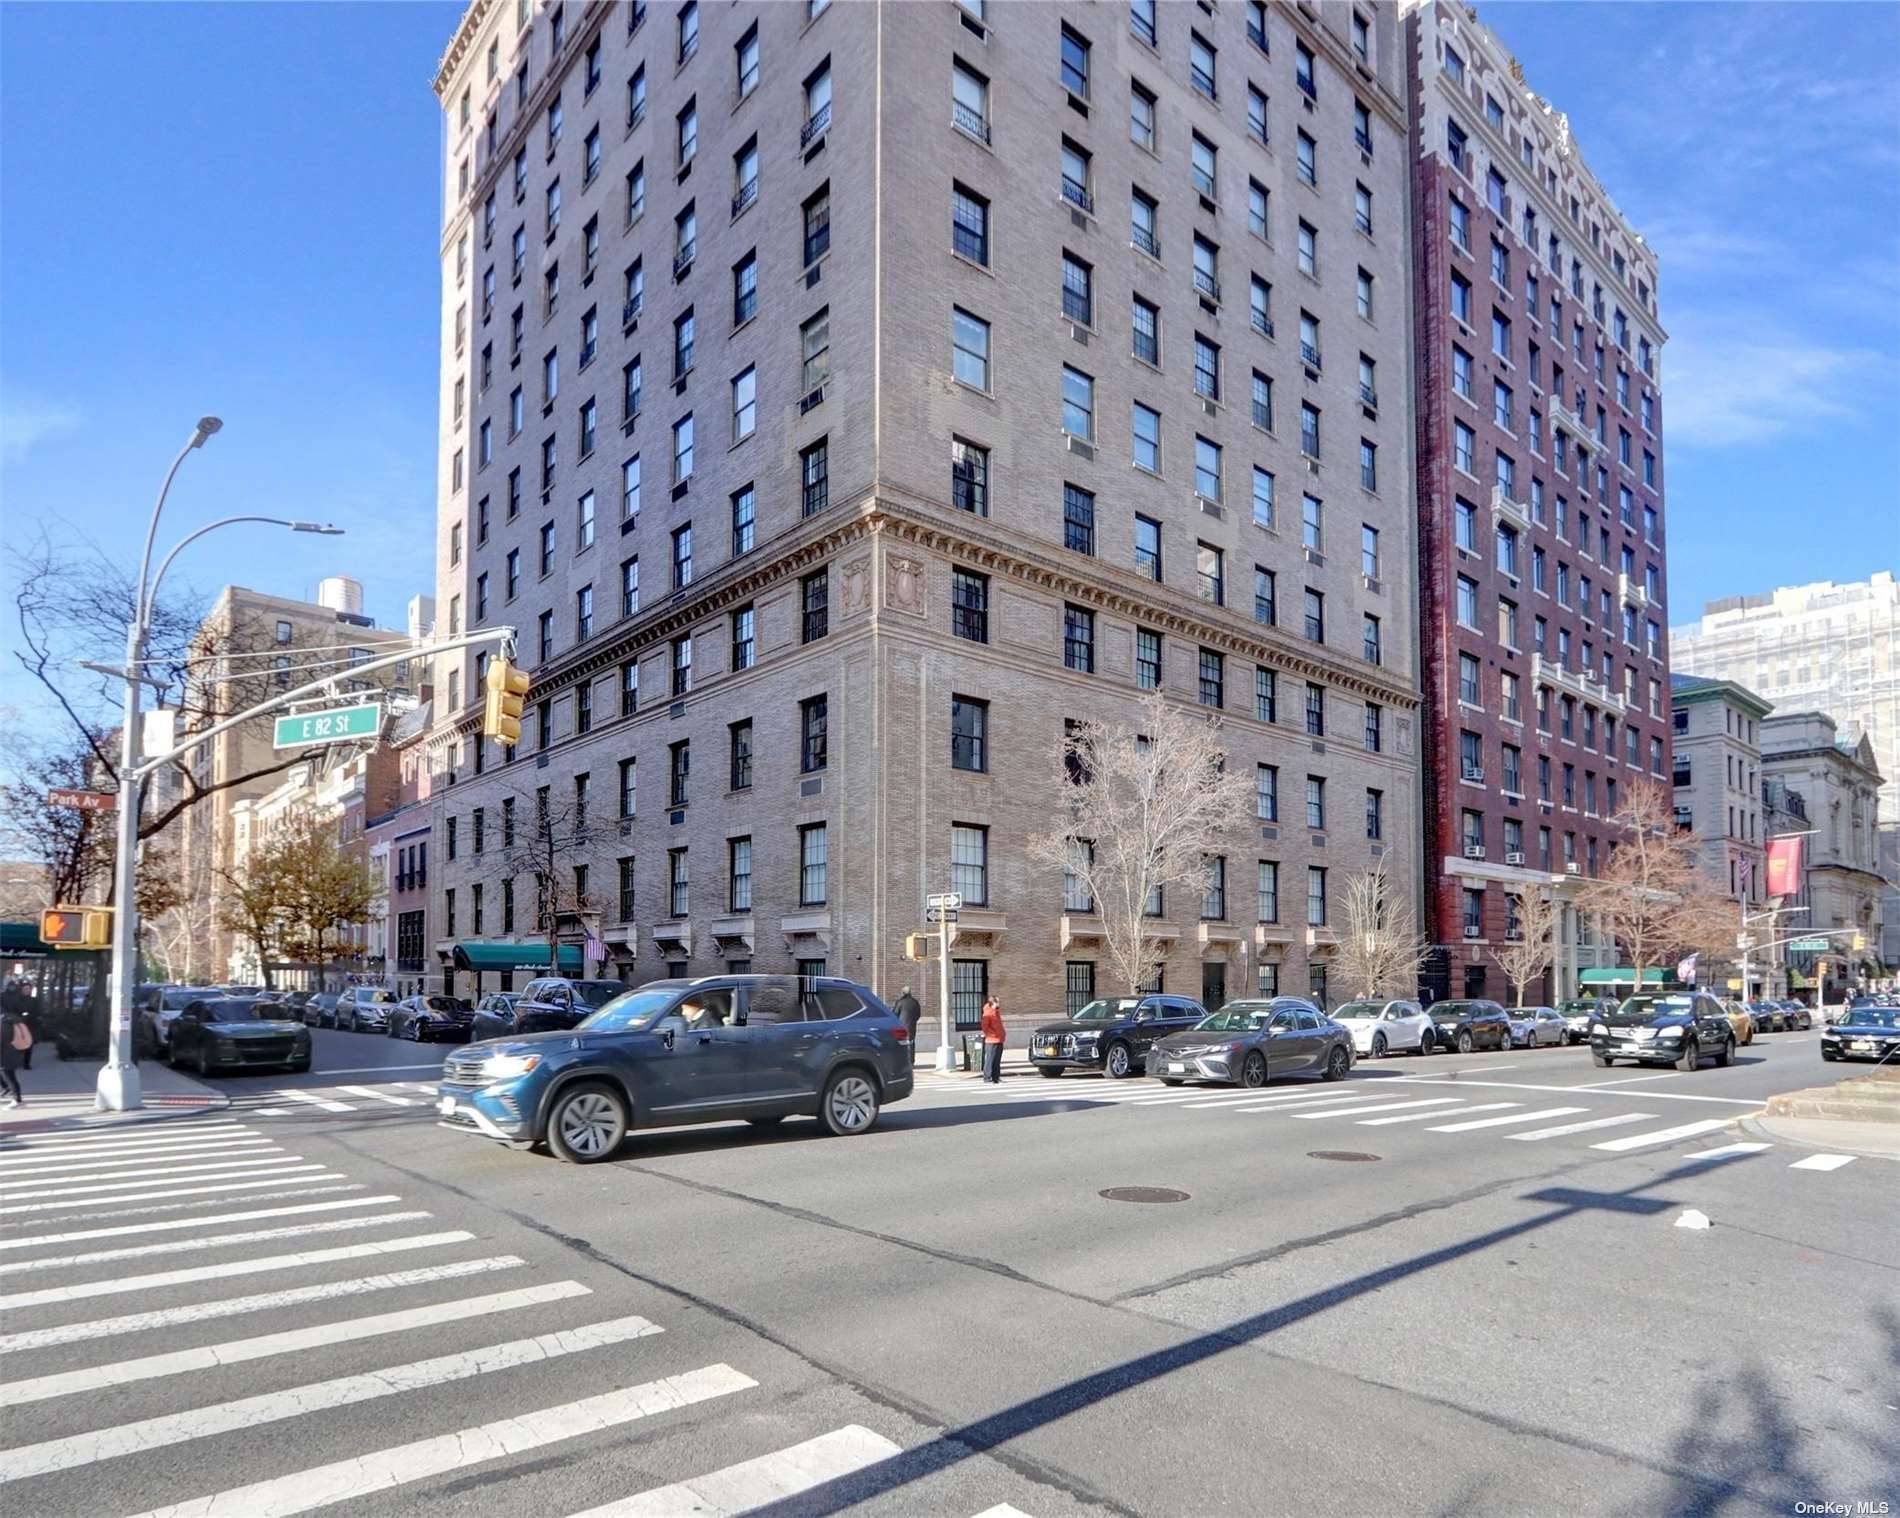 Exceptional duplex co operative apartment located at 960 Park Avenue, which is one of James E.